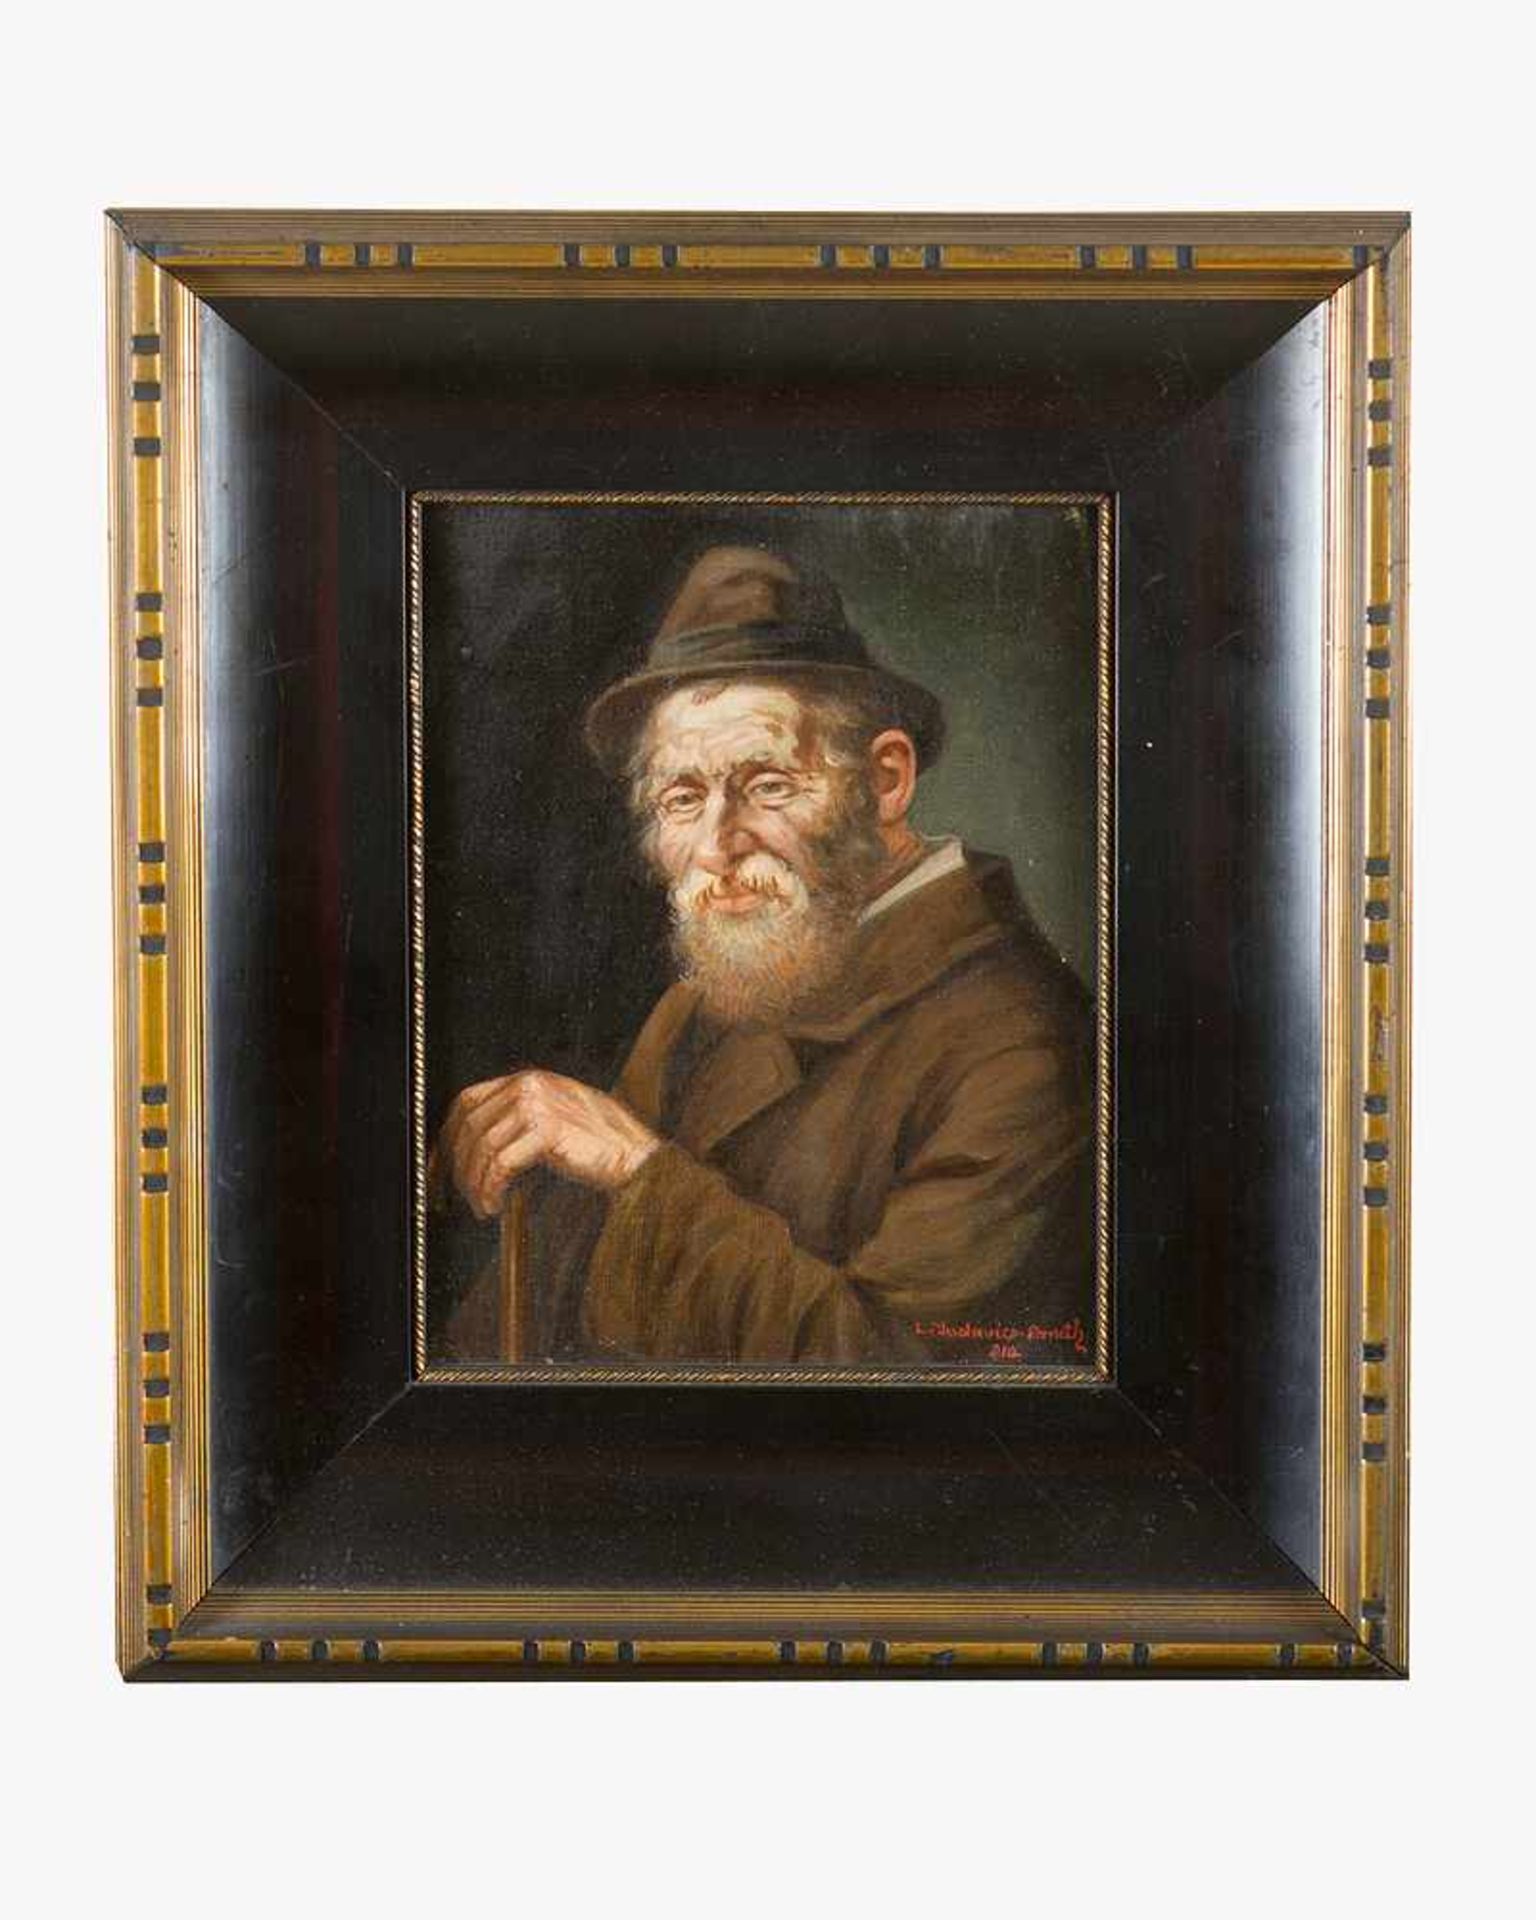 L. Judavics-Paneth around 1910, Portrait of a man, oil on canvas, signed bottom right and dated